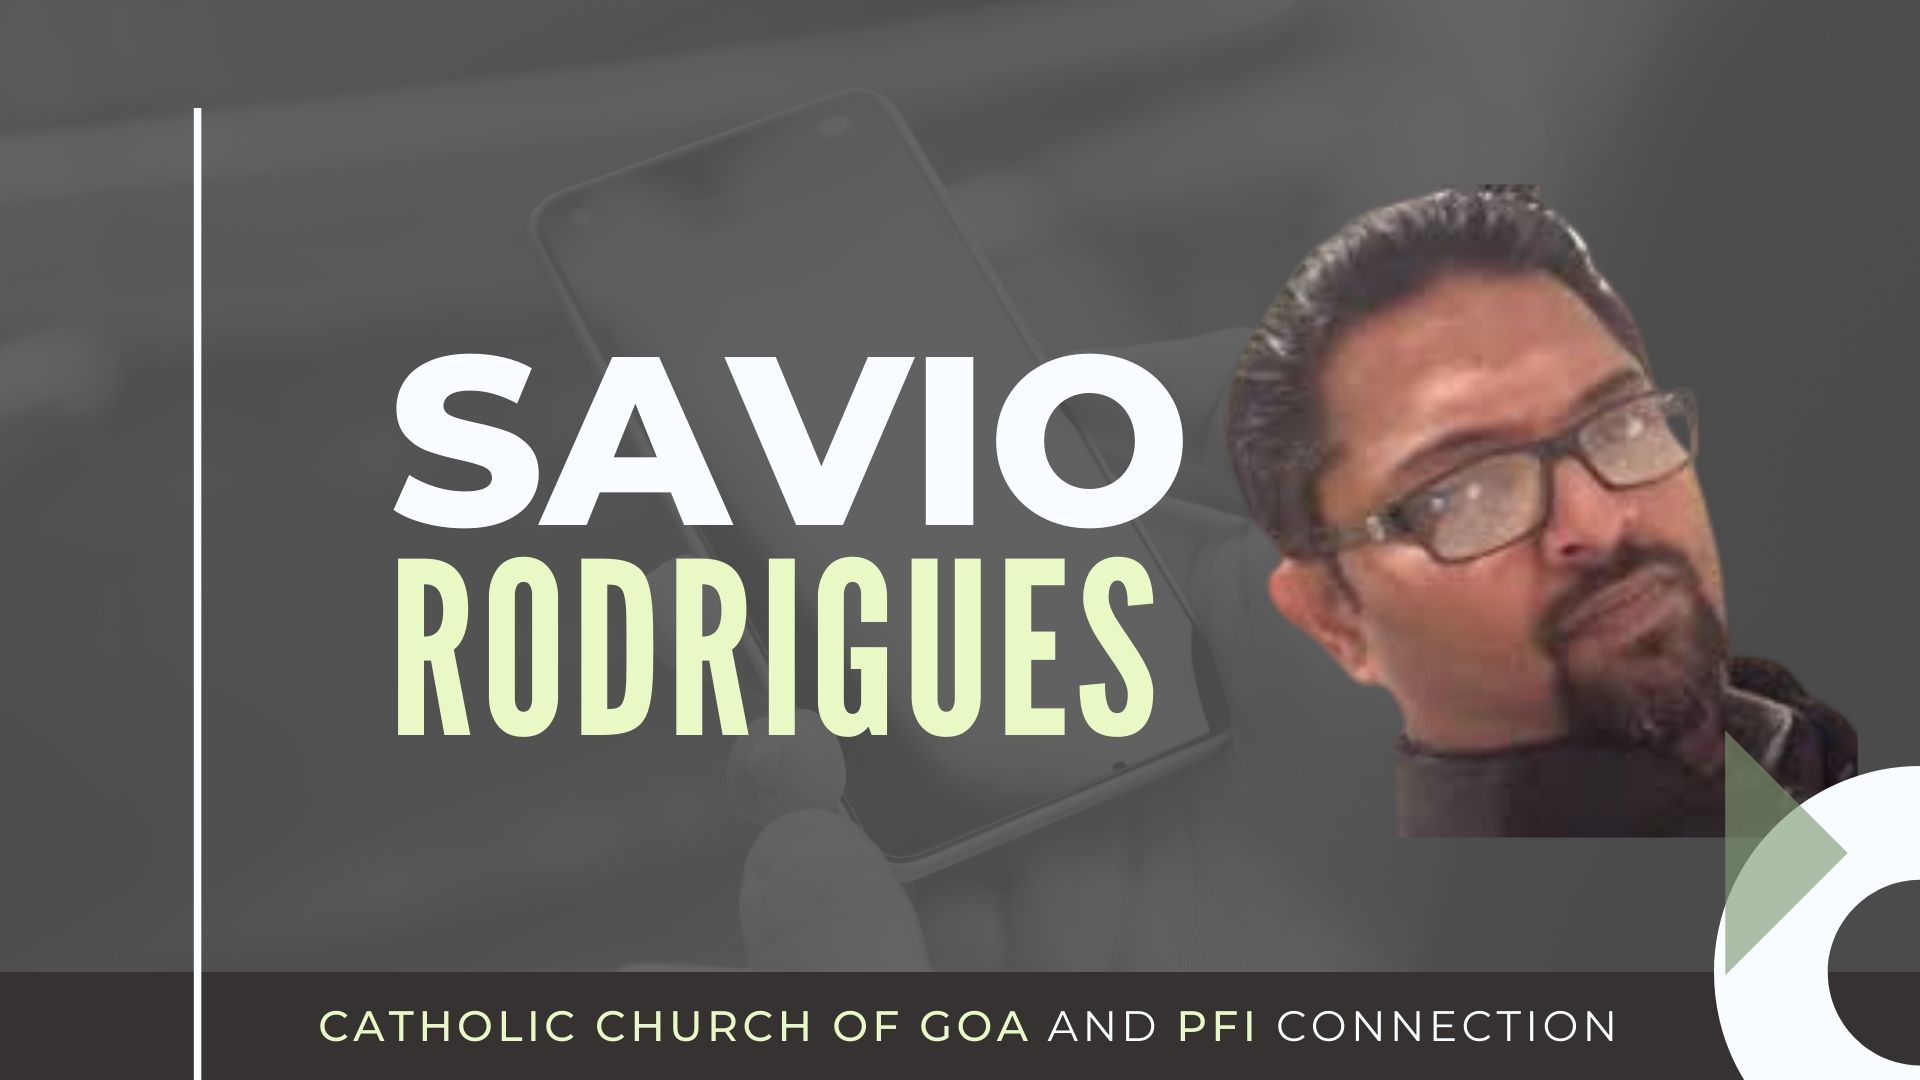 The Catholic Church of Goa, by association with PFI is playing a dangerous game, despite fully knowing PFI's antecedents, says Savio Rodrigues. Inaction by Government on his complaints against Farhan Akhtar is not helping, he adds. A must watch!